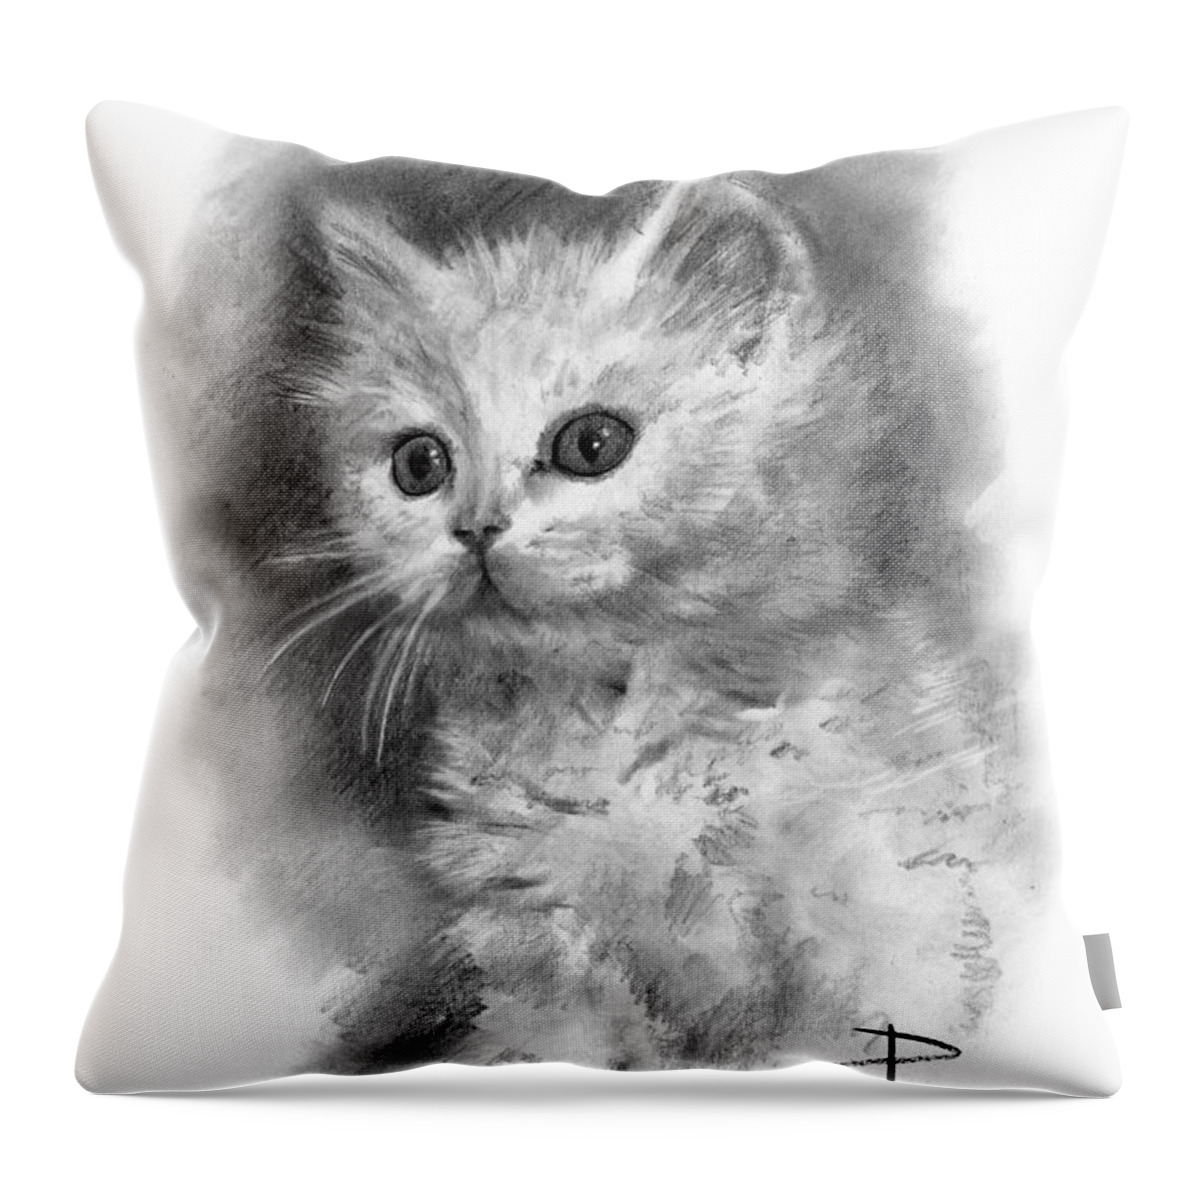 Pussycat Throw Pillow featuring the drawing Furball by Paul Davenport